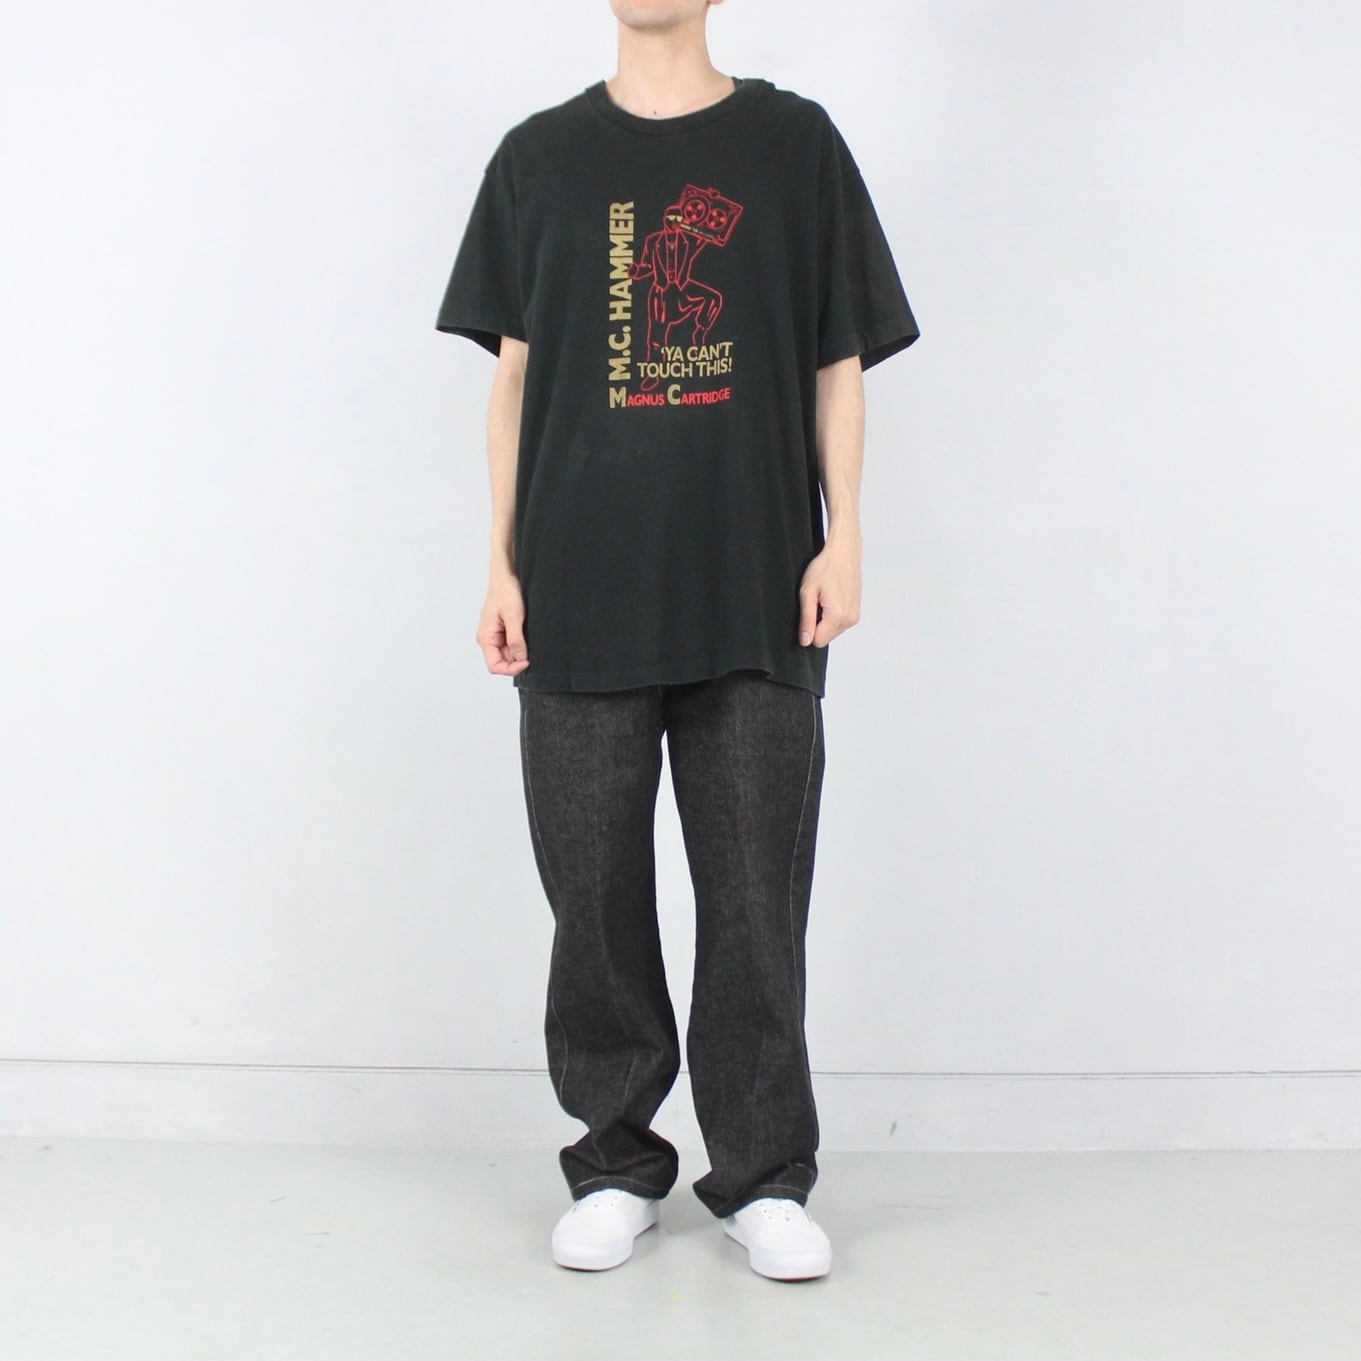 1990's vintage S/S M.C.HAMMER エムシーハマー プリントTシャツ Made in USA【FF-5522】 | cv